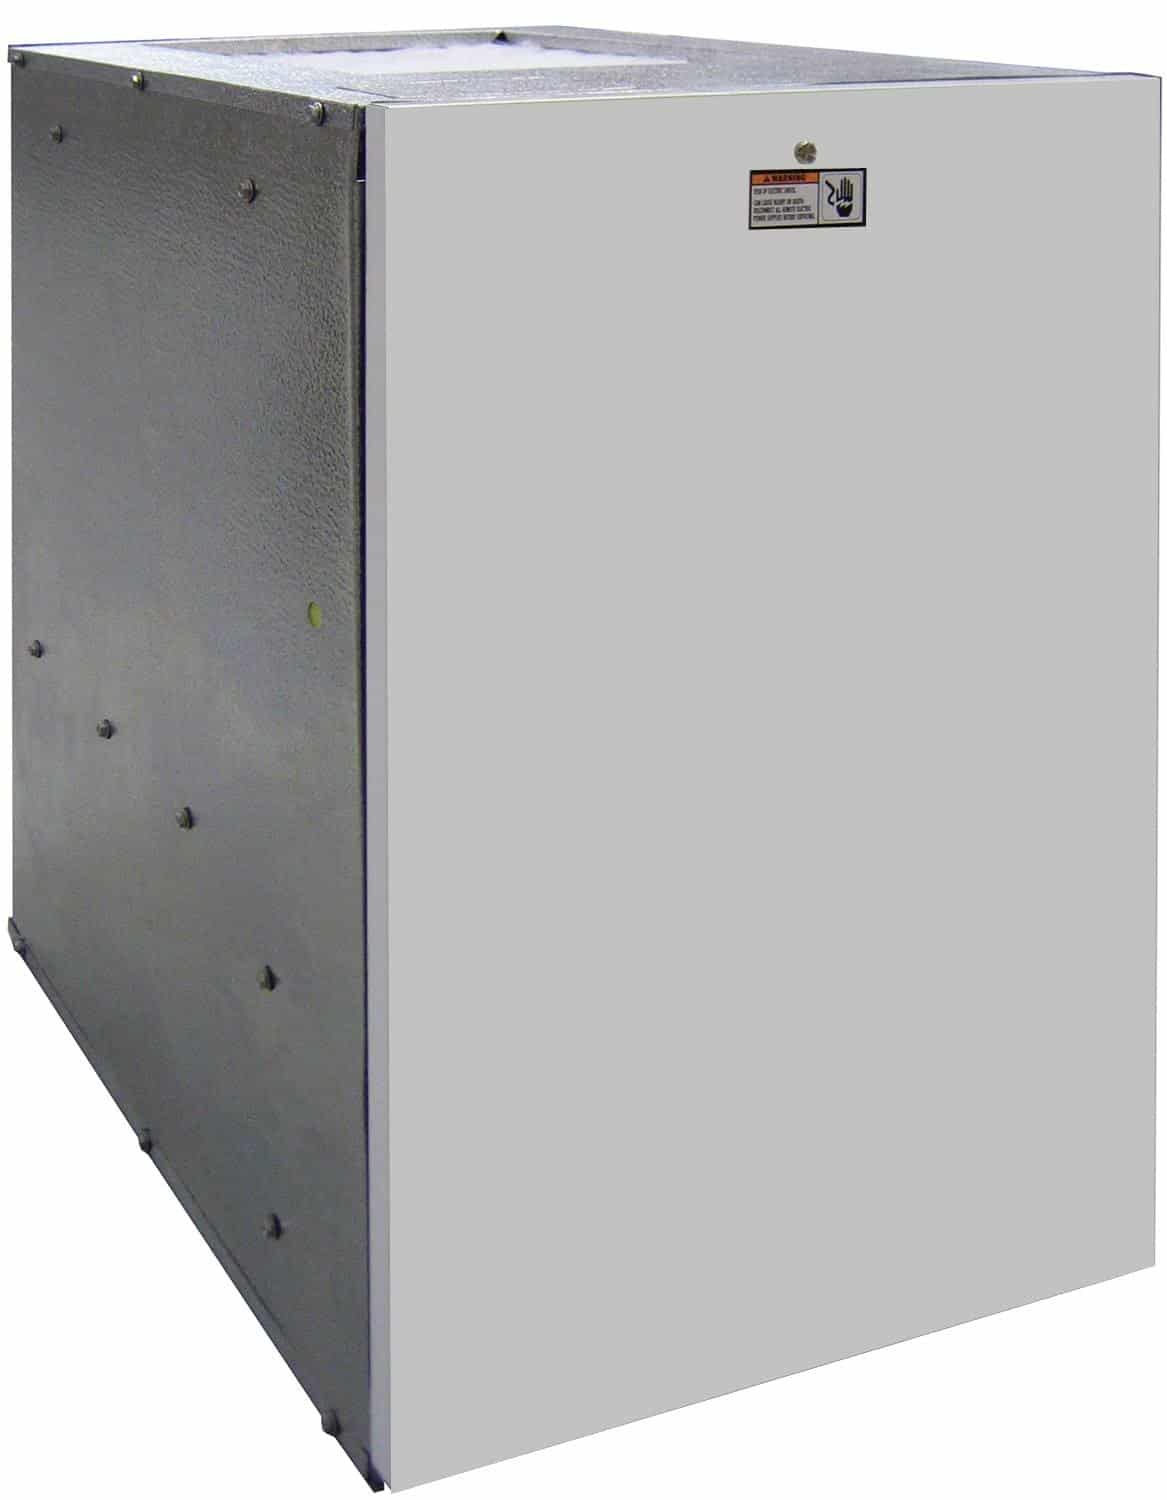 Electric Furnace Home Depot